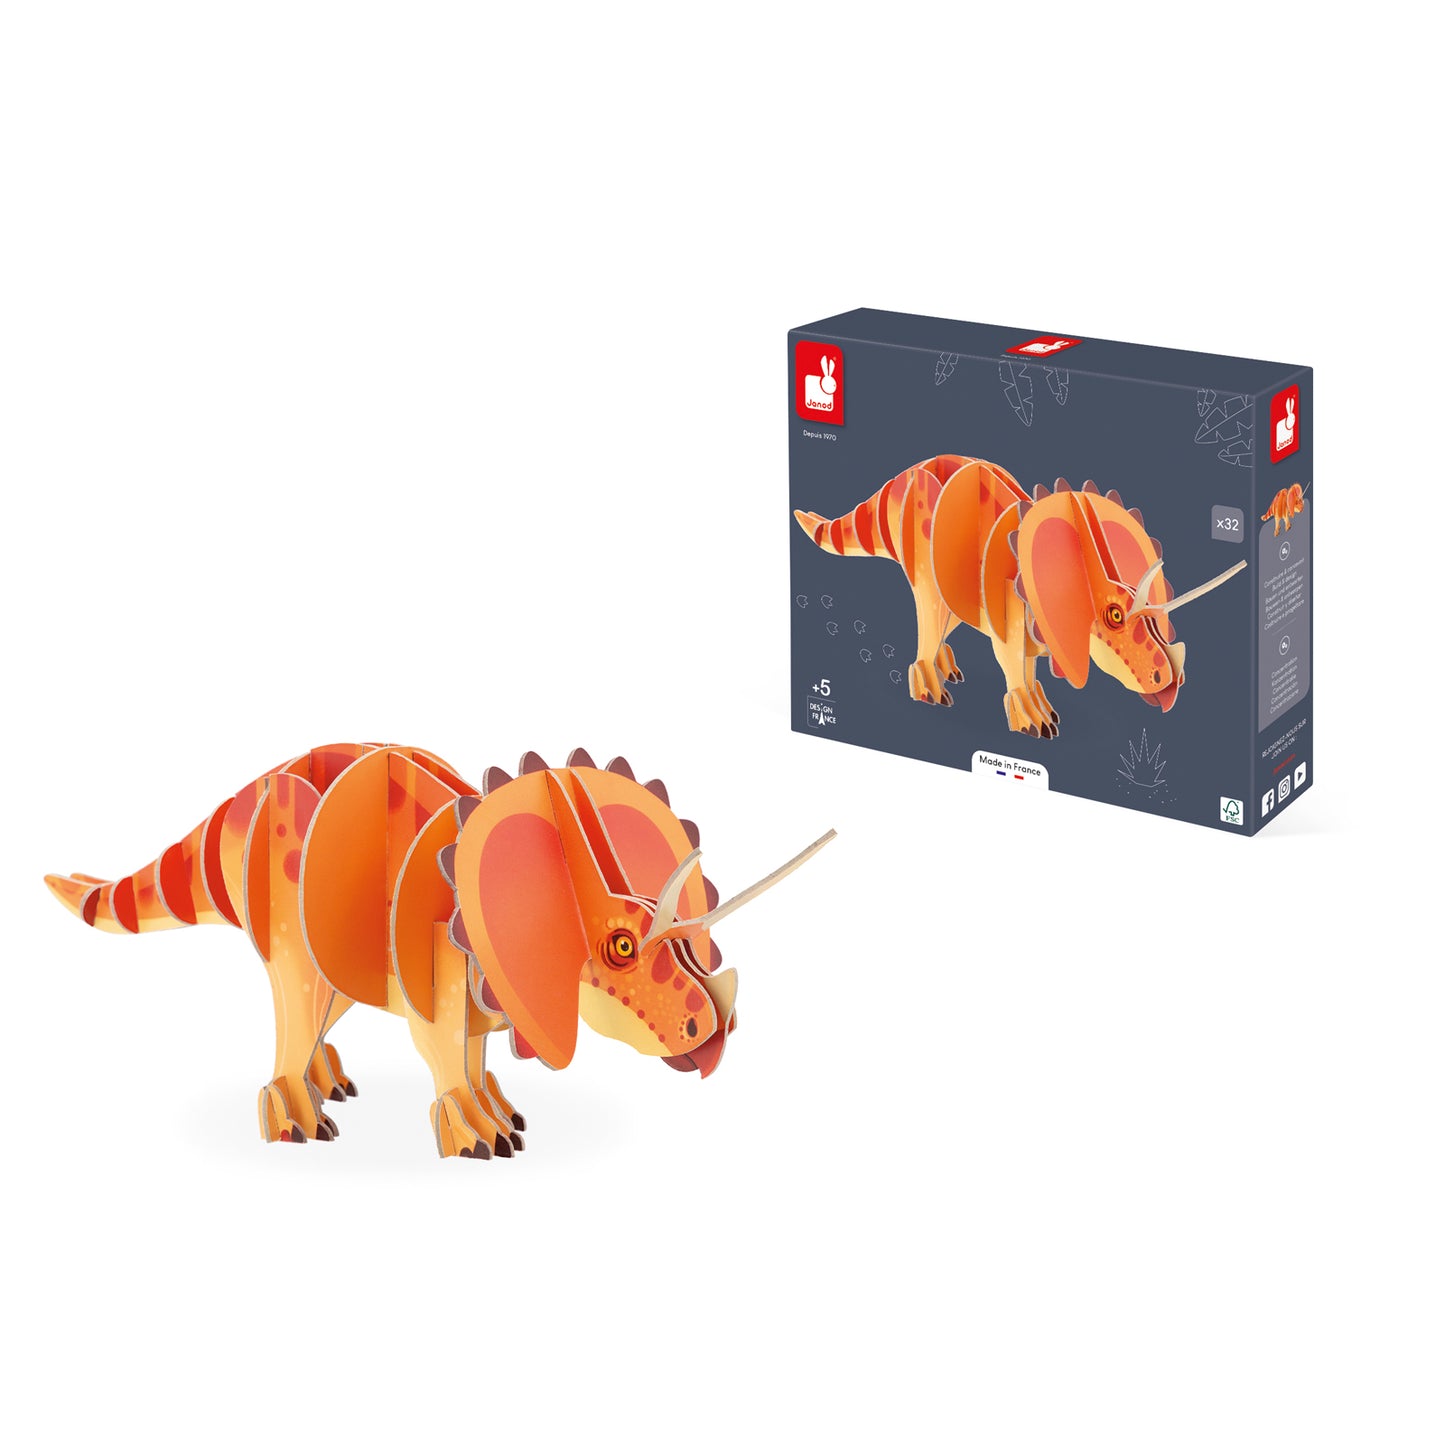 Janod dino | 3D puzzel triceratops